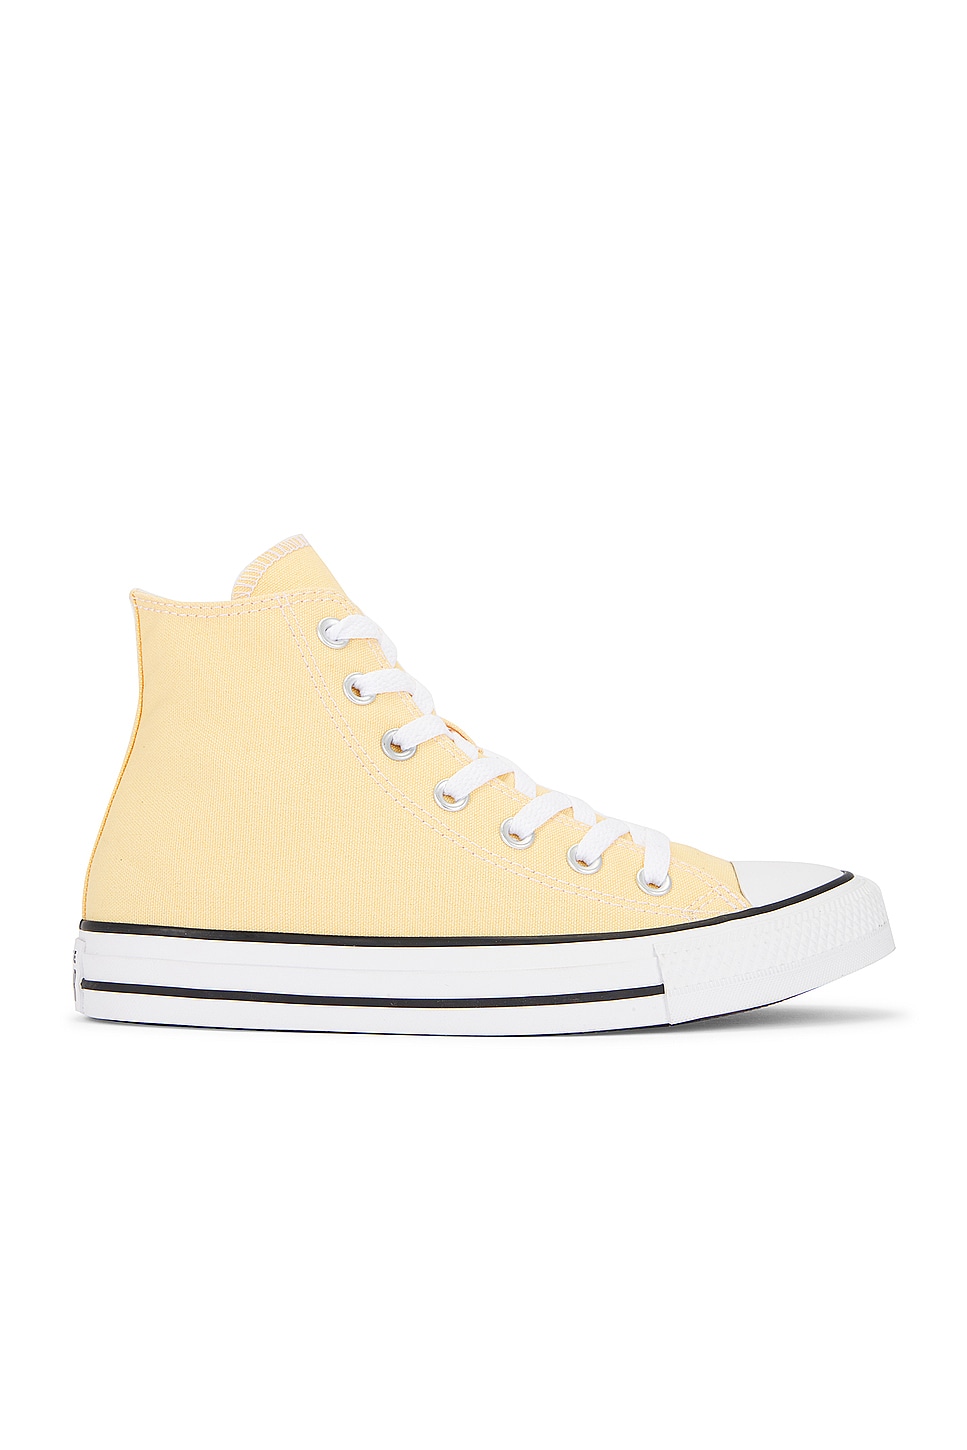 Image 1 of Converse Chuck Taylor All Star High Top in Afternoon Sun